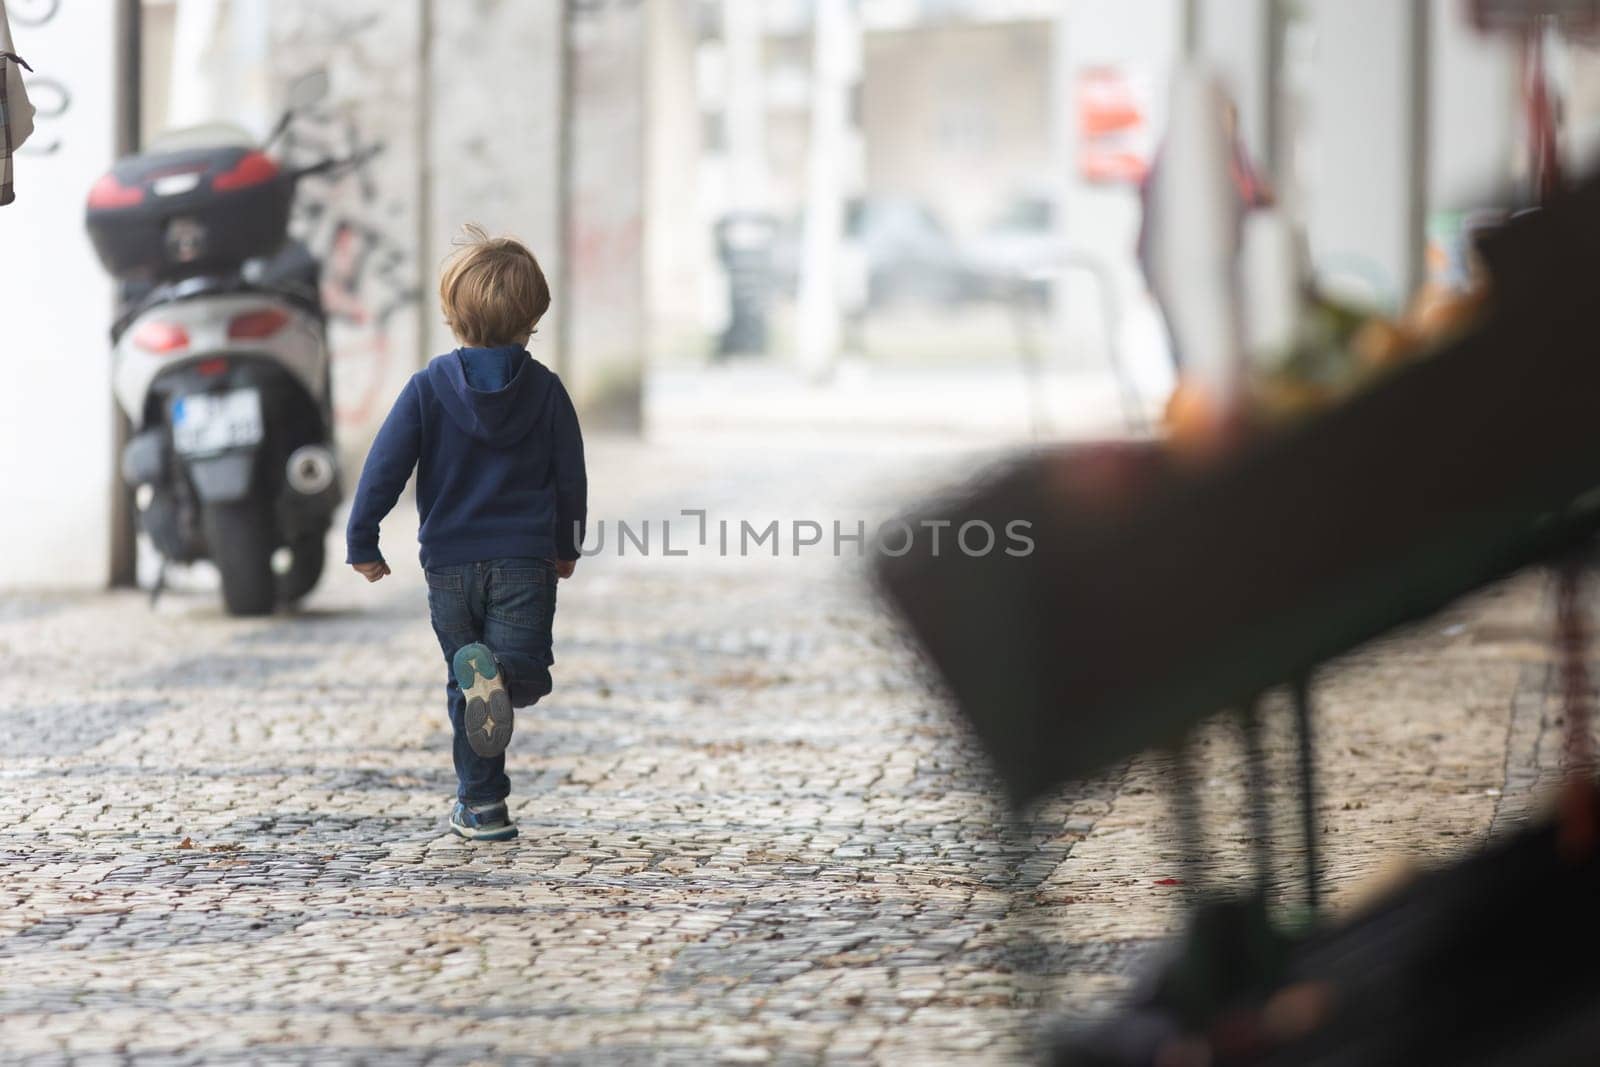 A young boy walking down a cobblestone street - view from behind